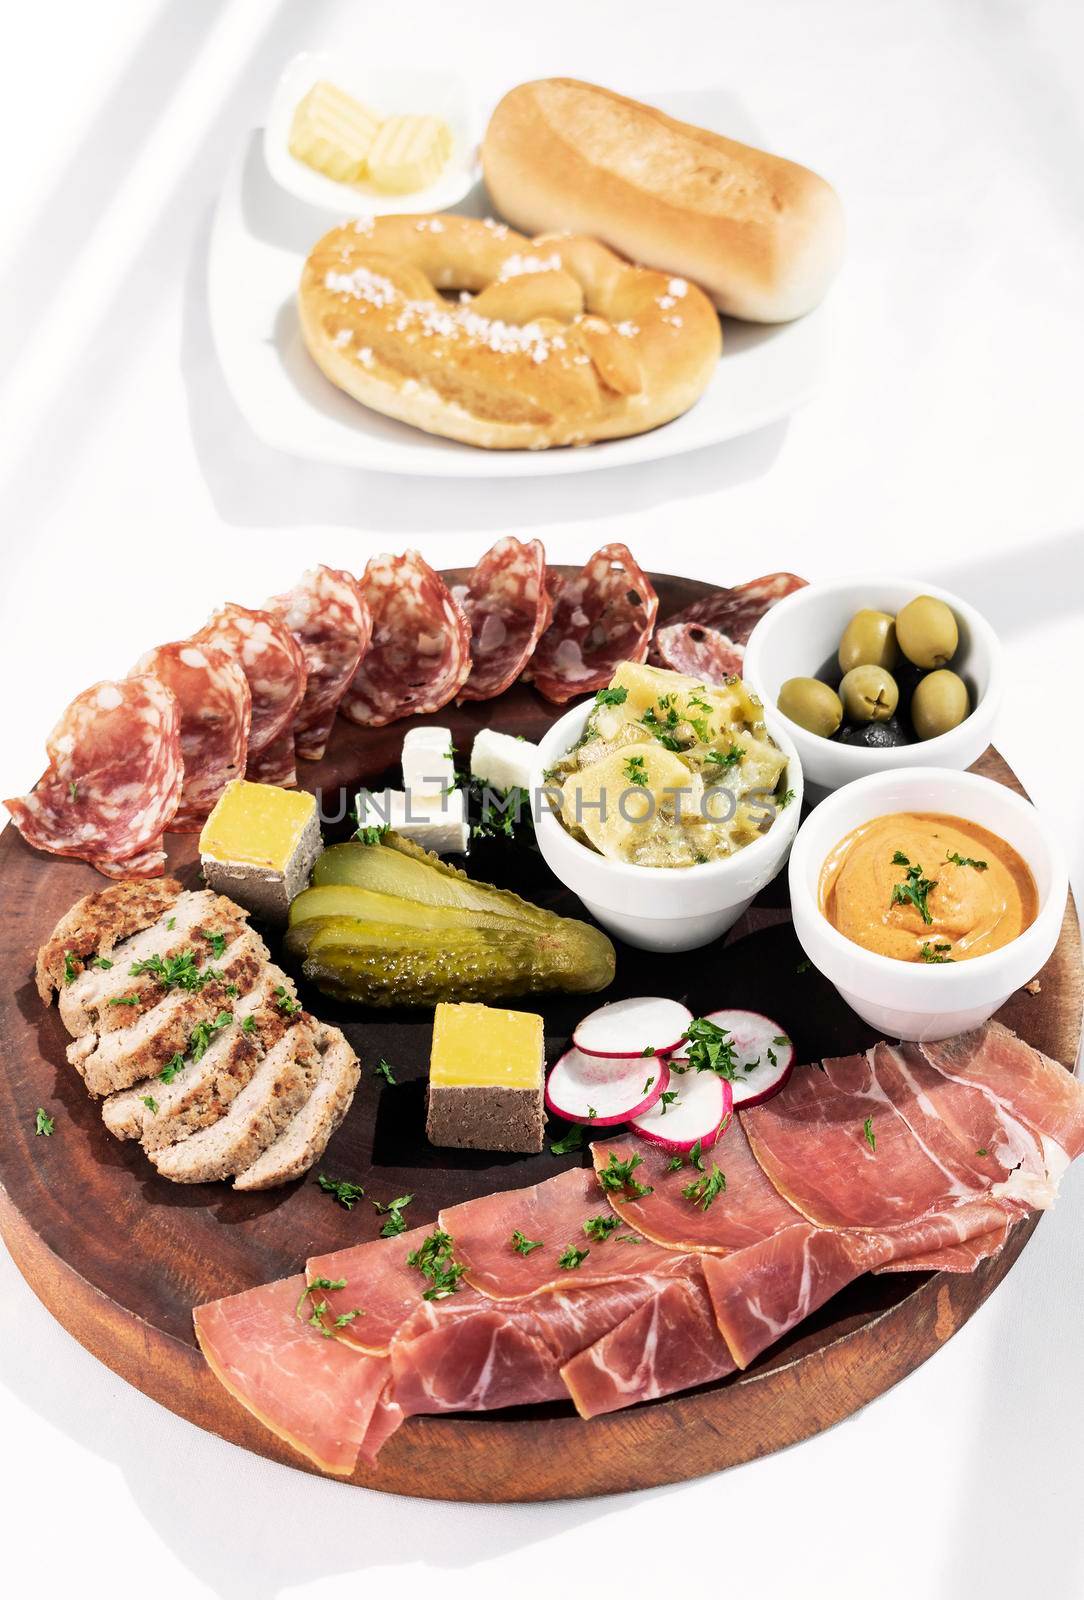 german cold cuts tapas snack platter with meats and bread by jackmalipan